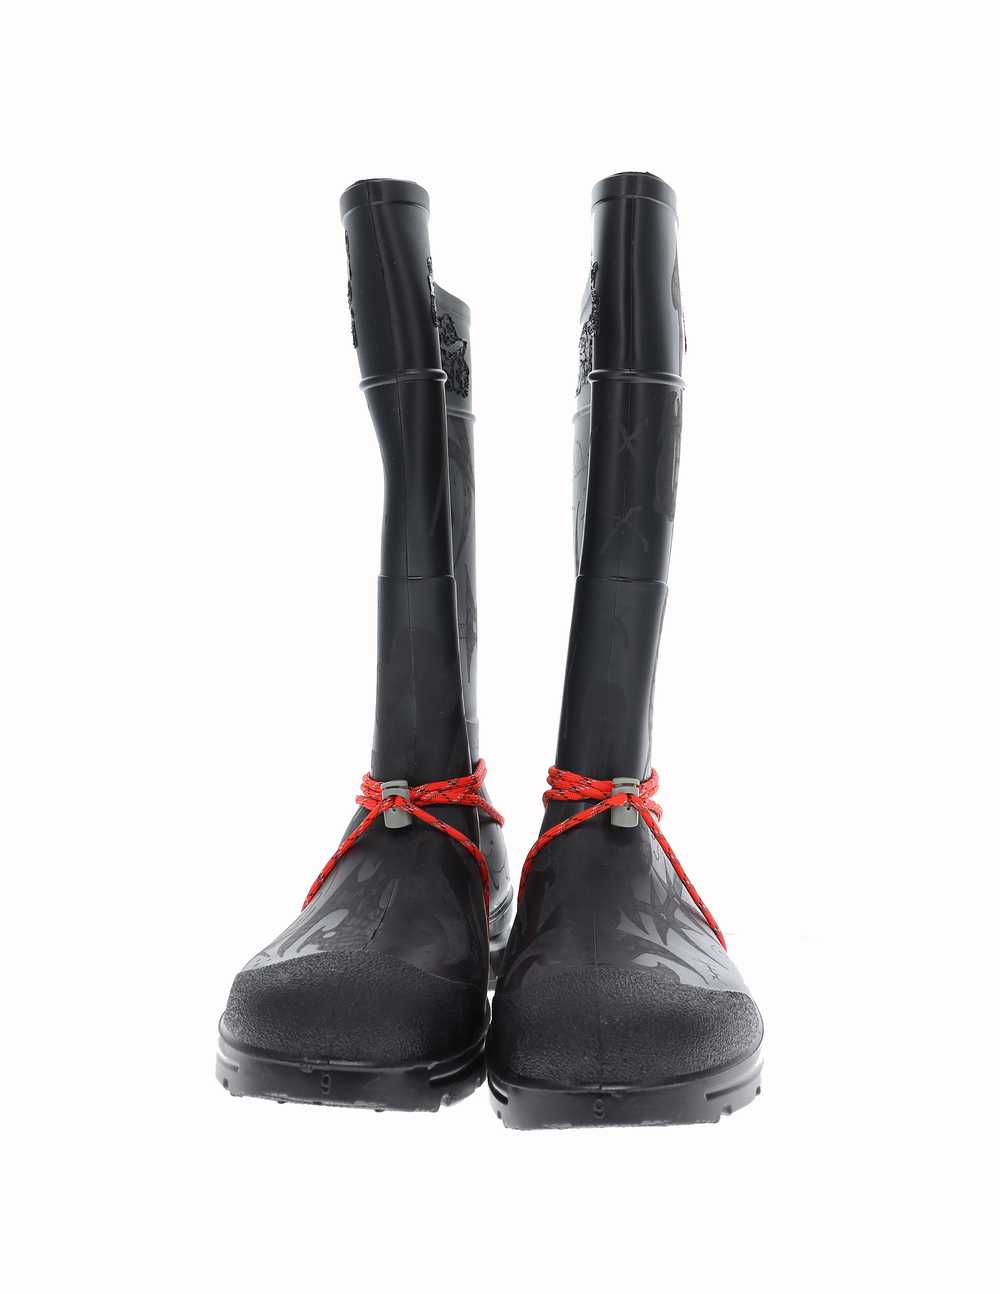 OrderByDisorder 1/1 Engraved Rubber Boots - image 7